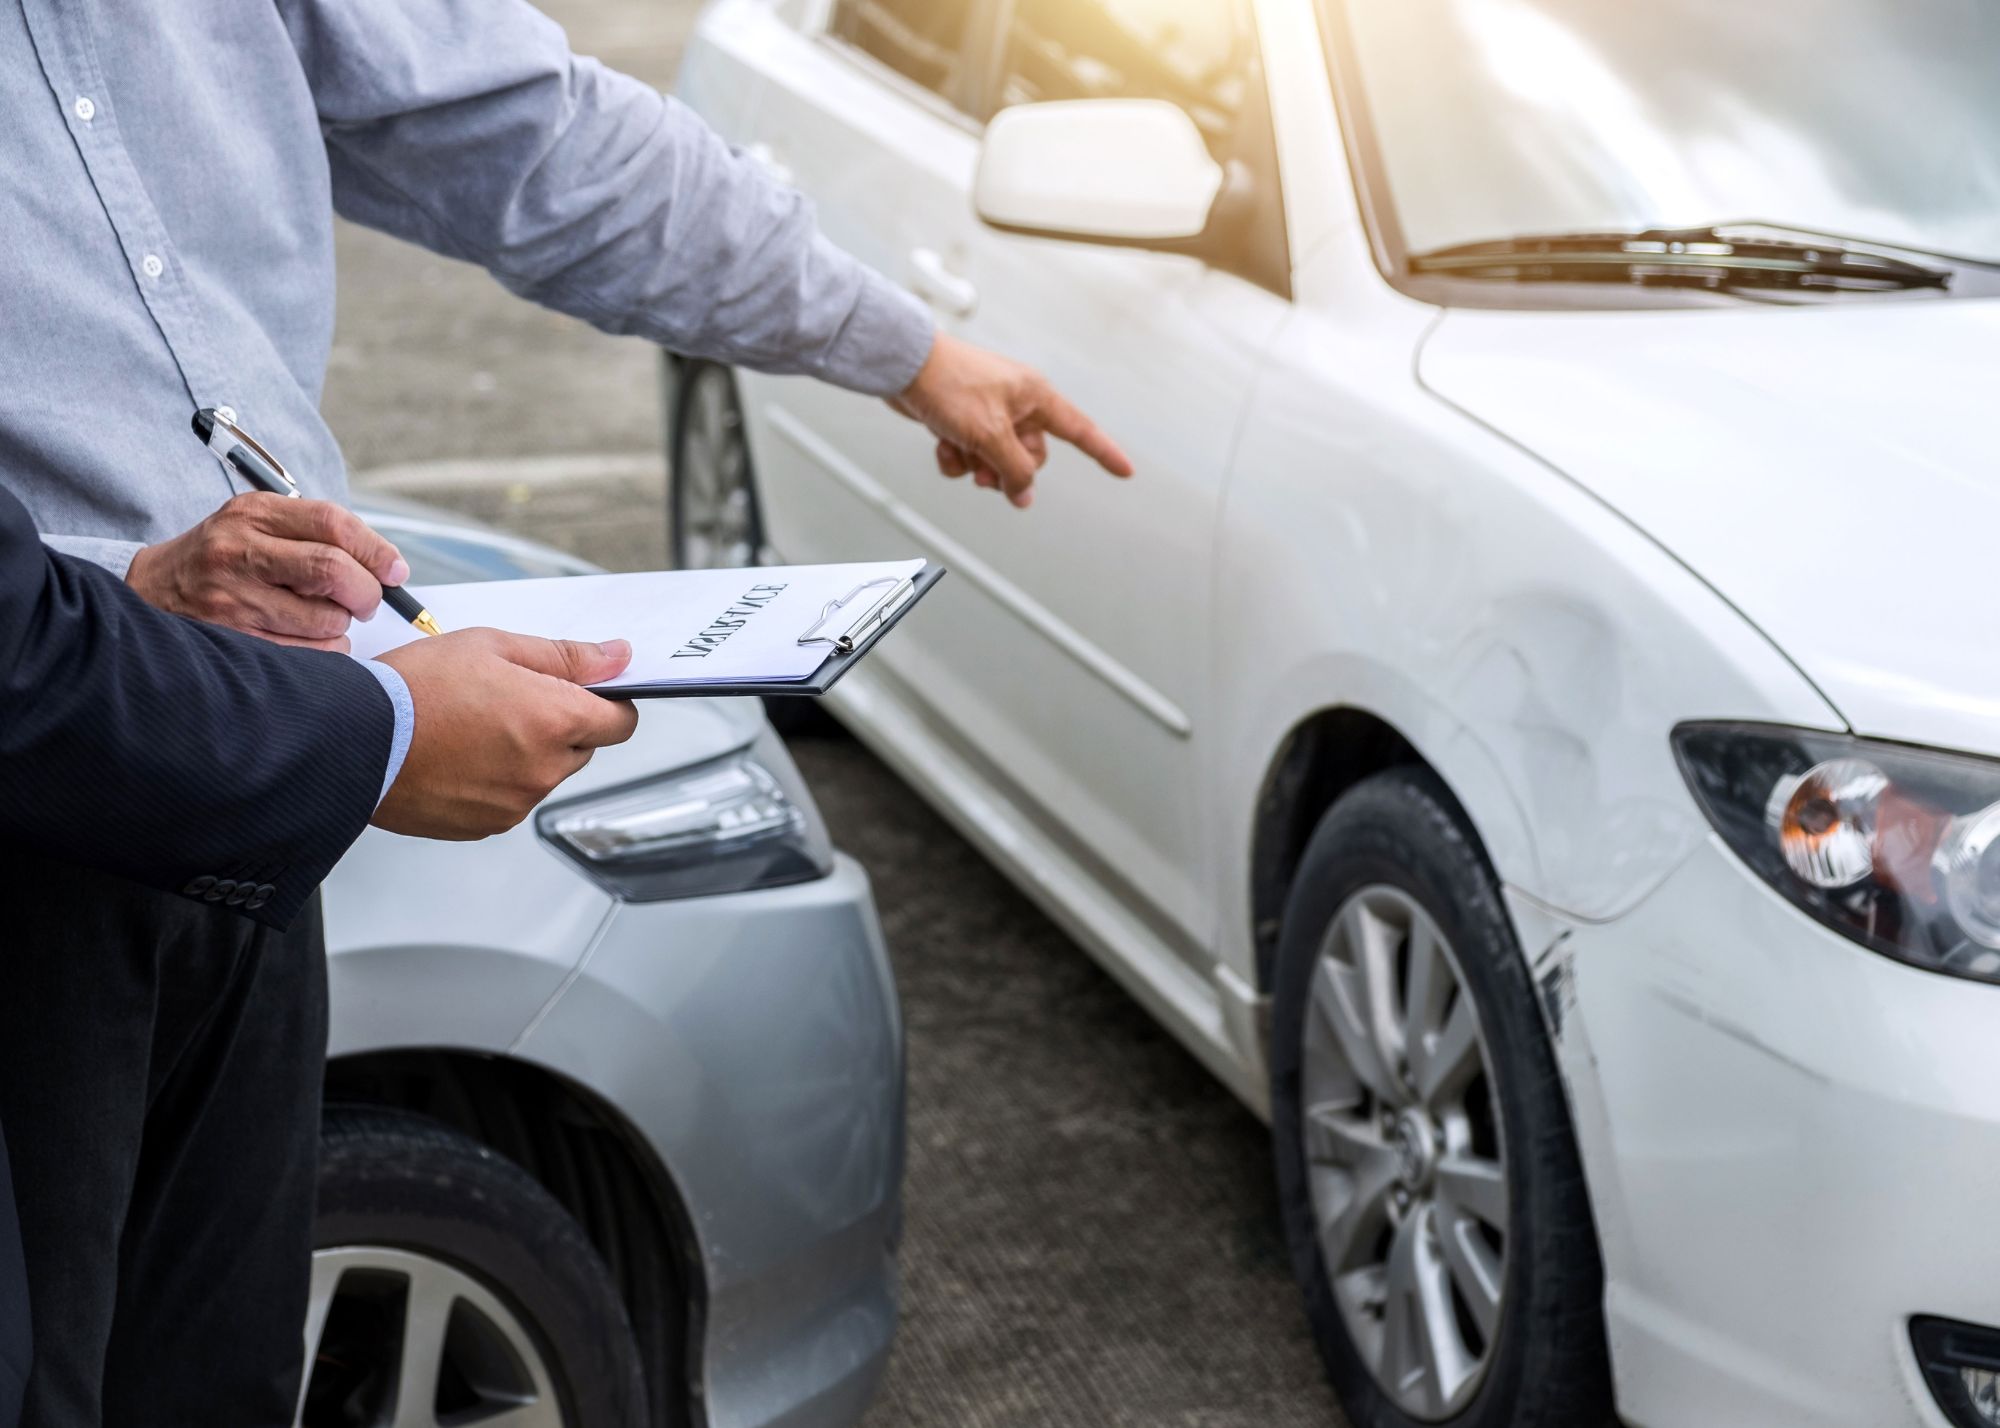 SR22 state car coverage is a type of auto insurance required for high-risk drivers in order to maintain their driving privileges. It is commonly used in Salt Lake City, UT to fulfill legal requirements.